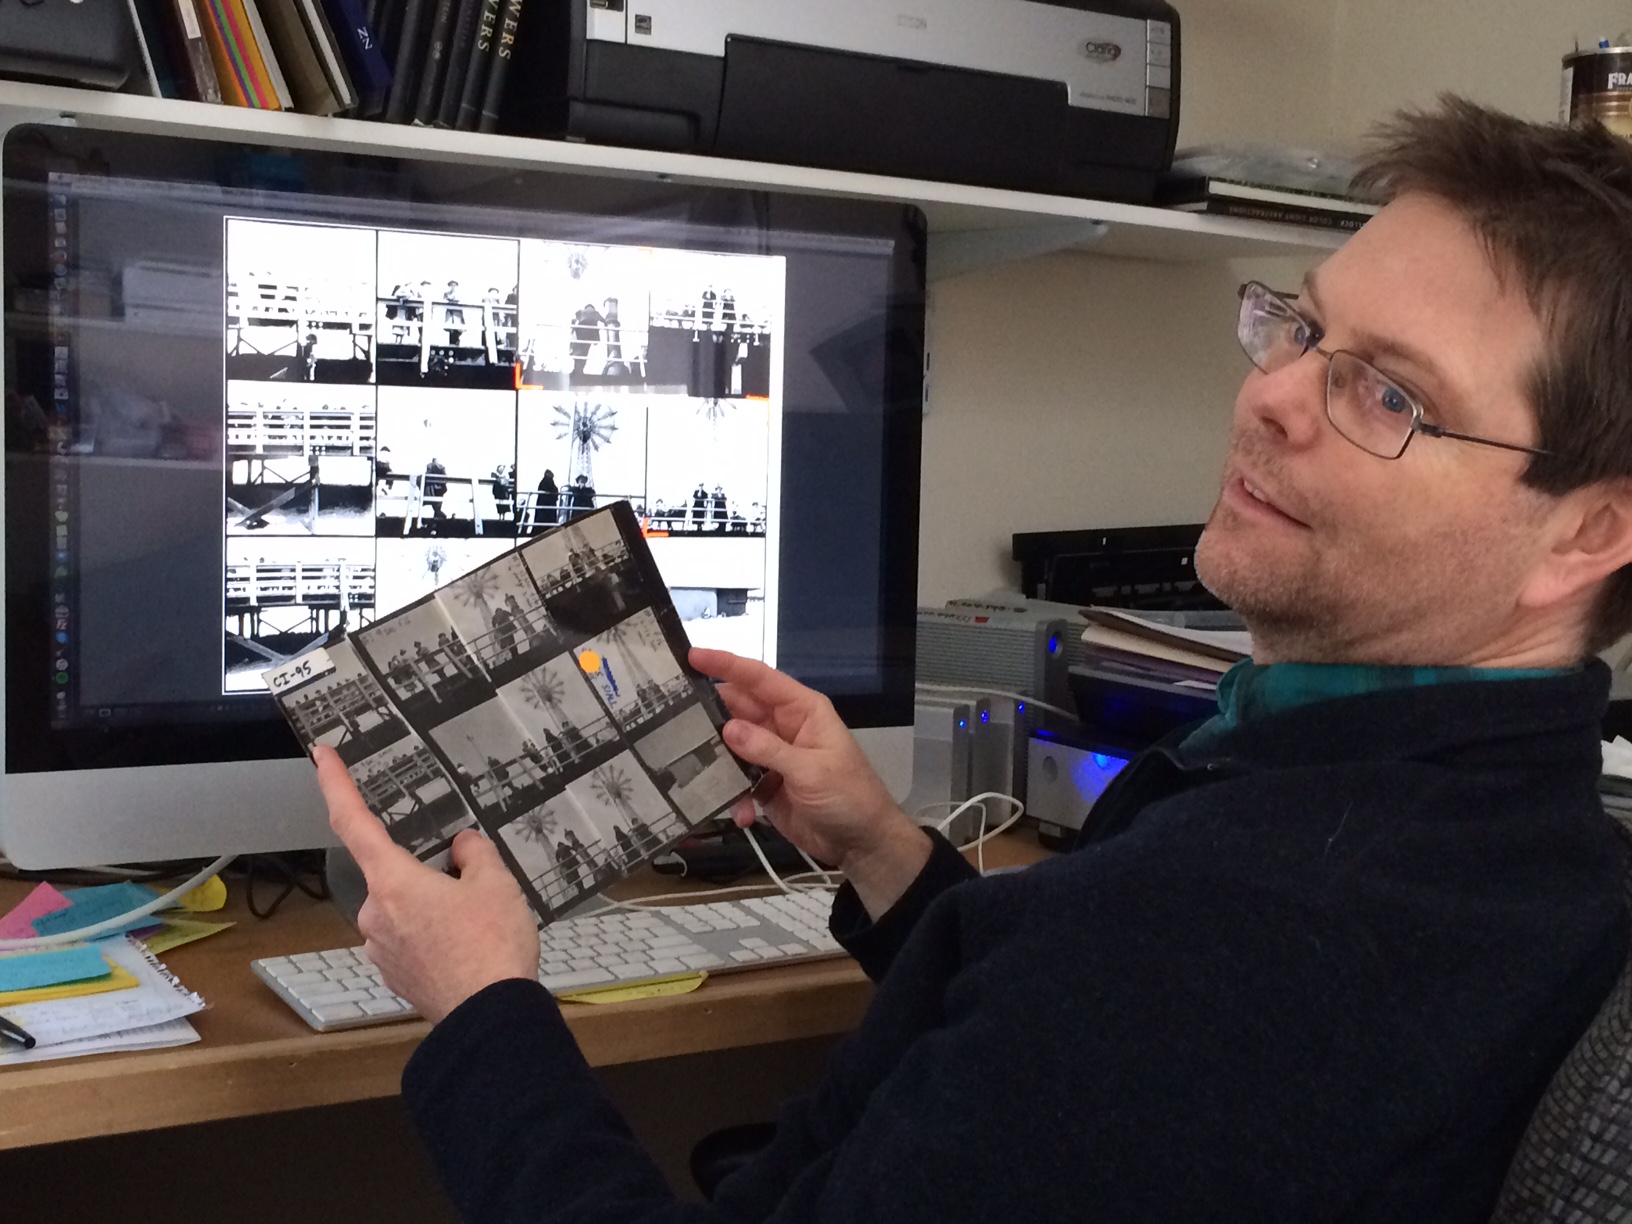 John holding up the original contact sheet ih comparison to screen view.  